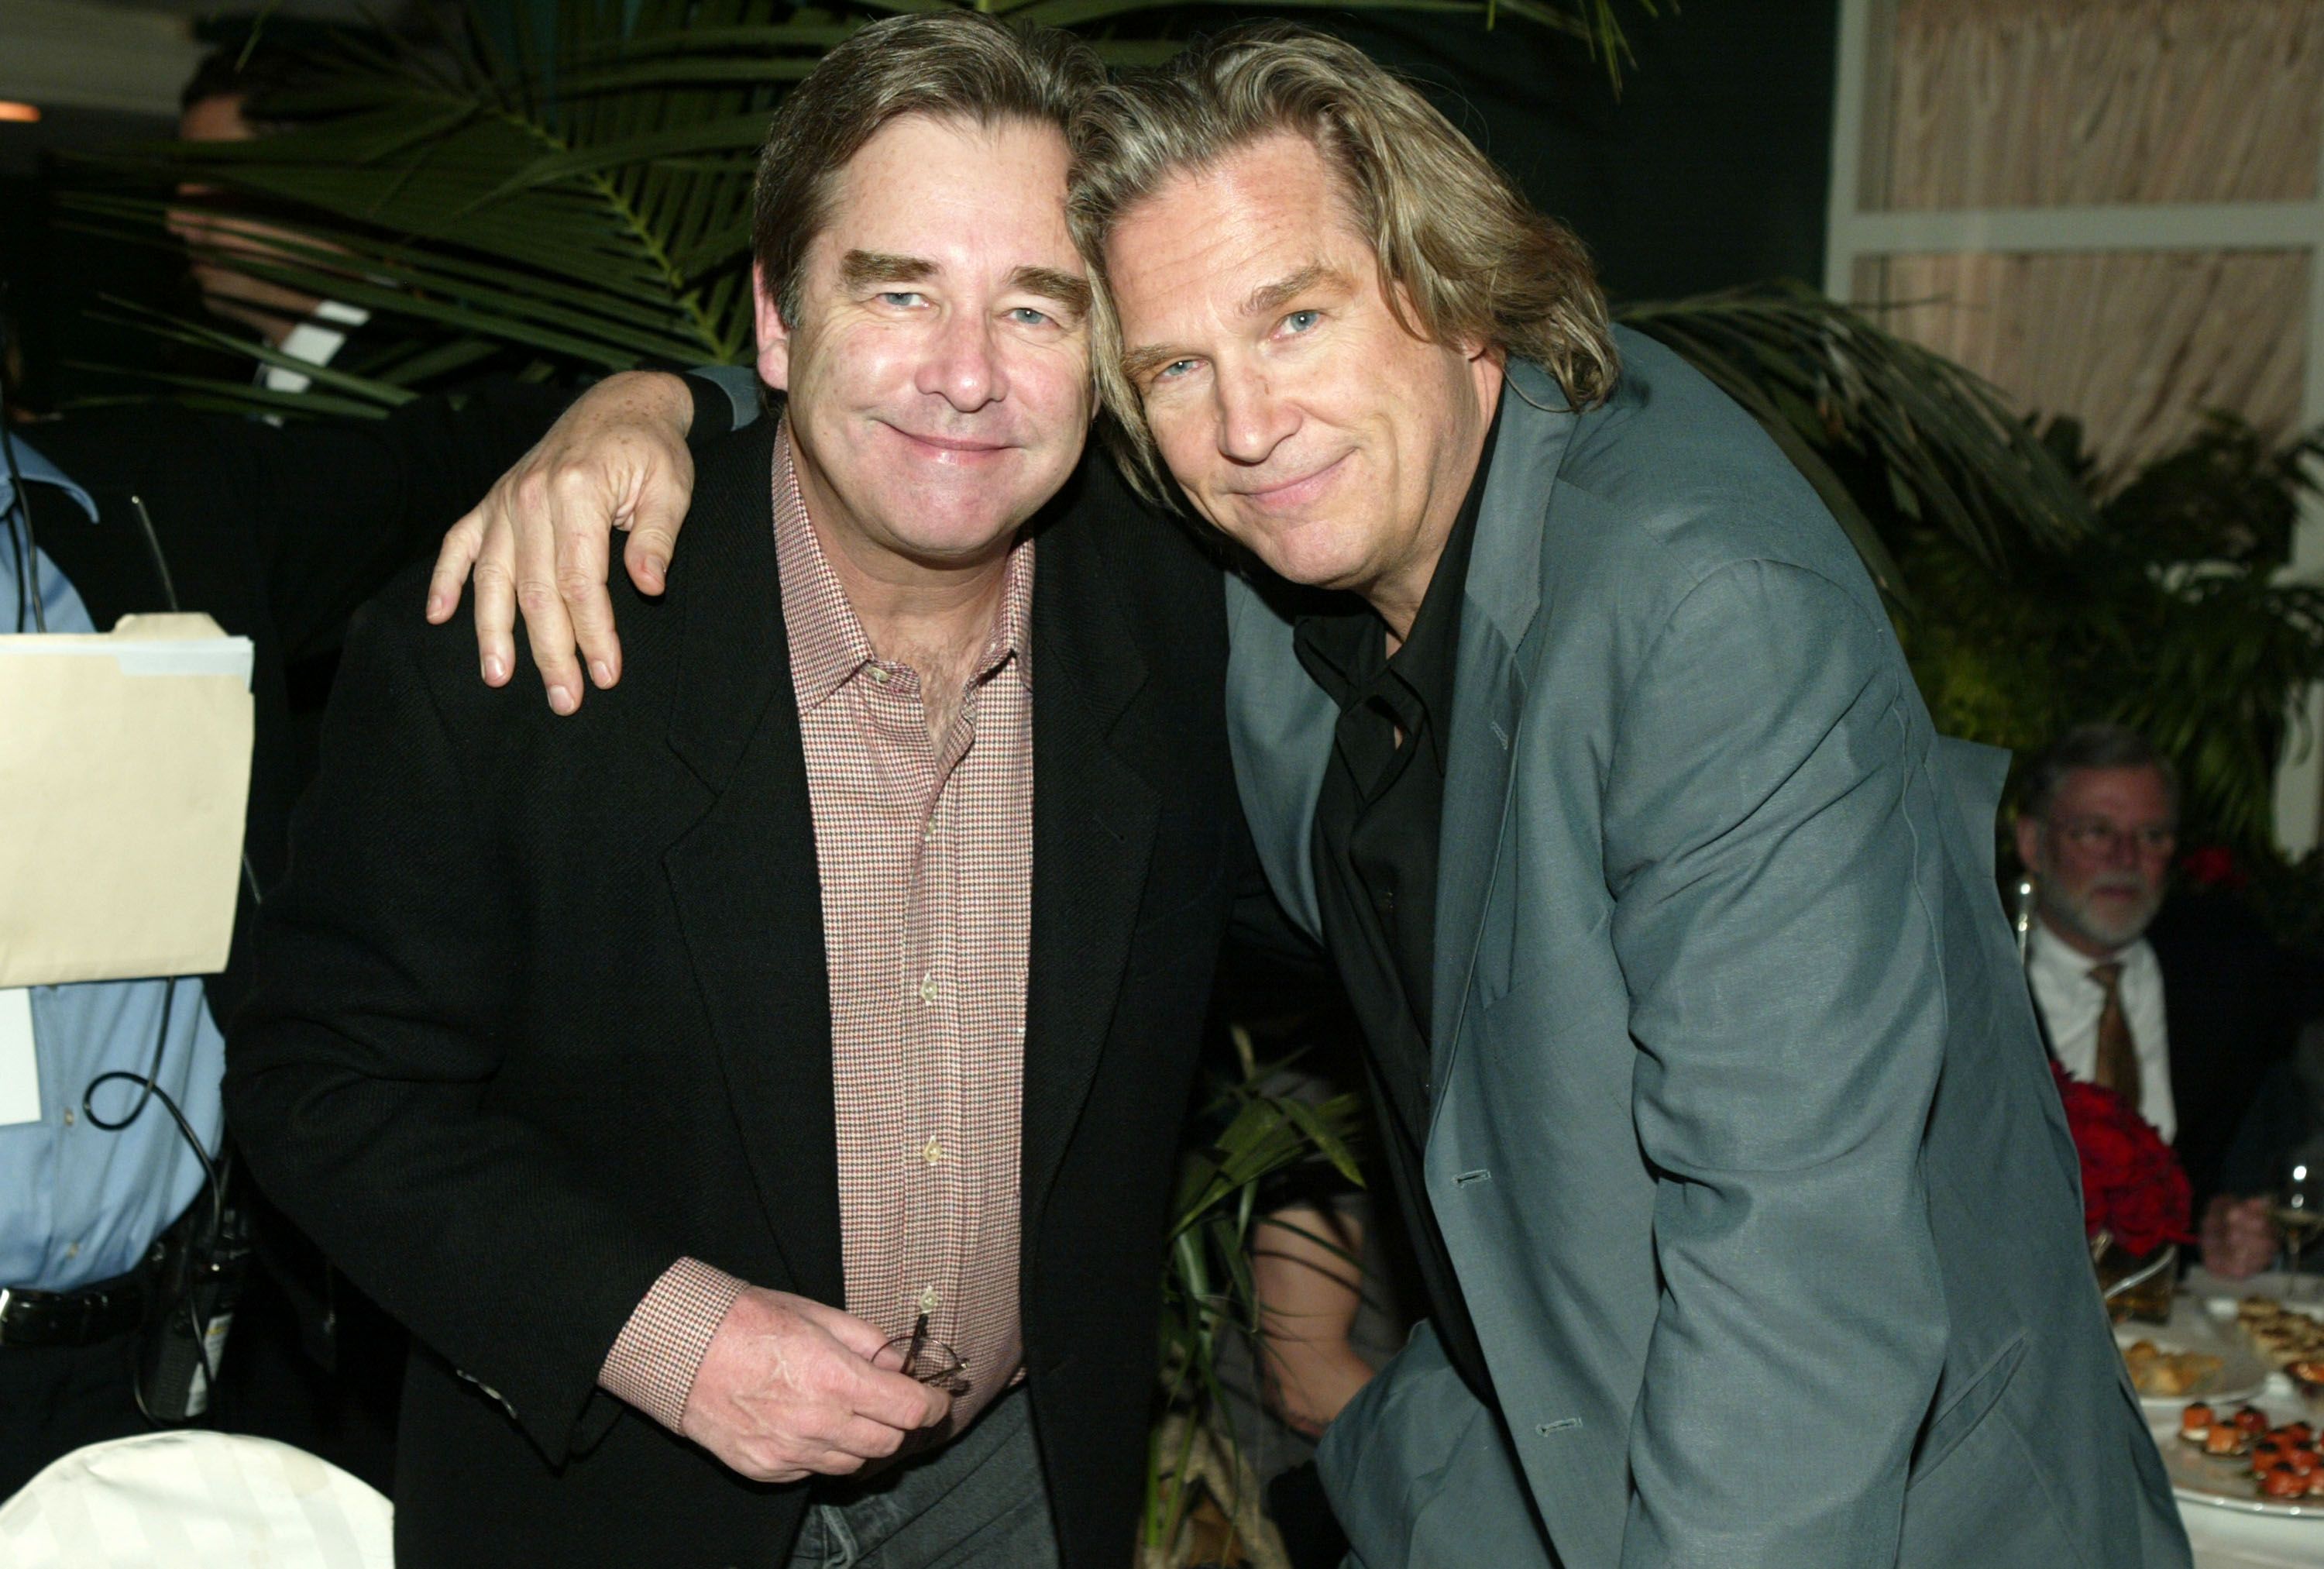 Beau Bridges and Jeff Bridges at the "Seabiscuit" DVD Launch -Party in Beverly Hills | Source: Getty Images